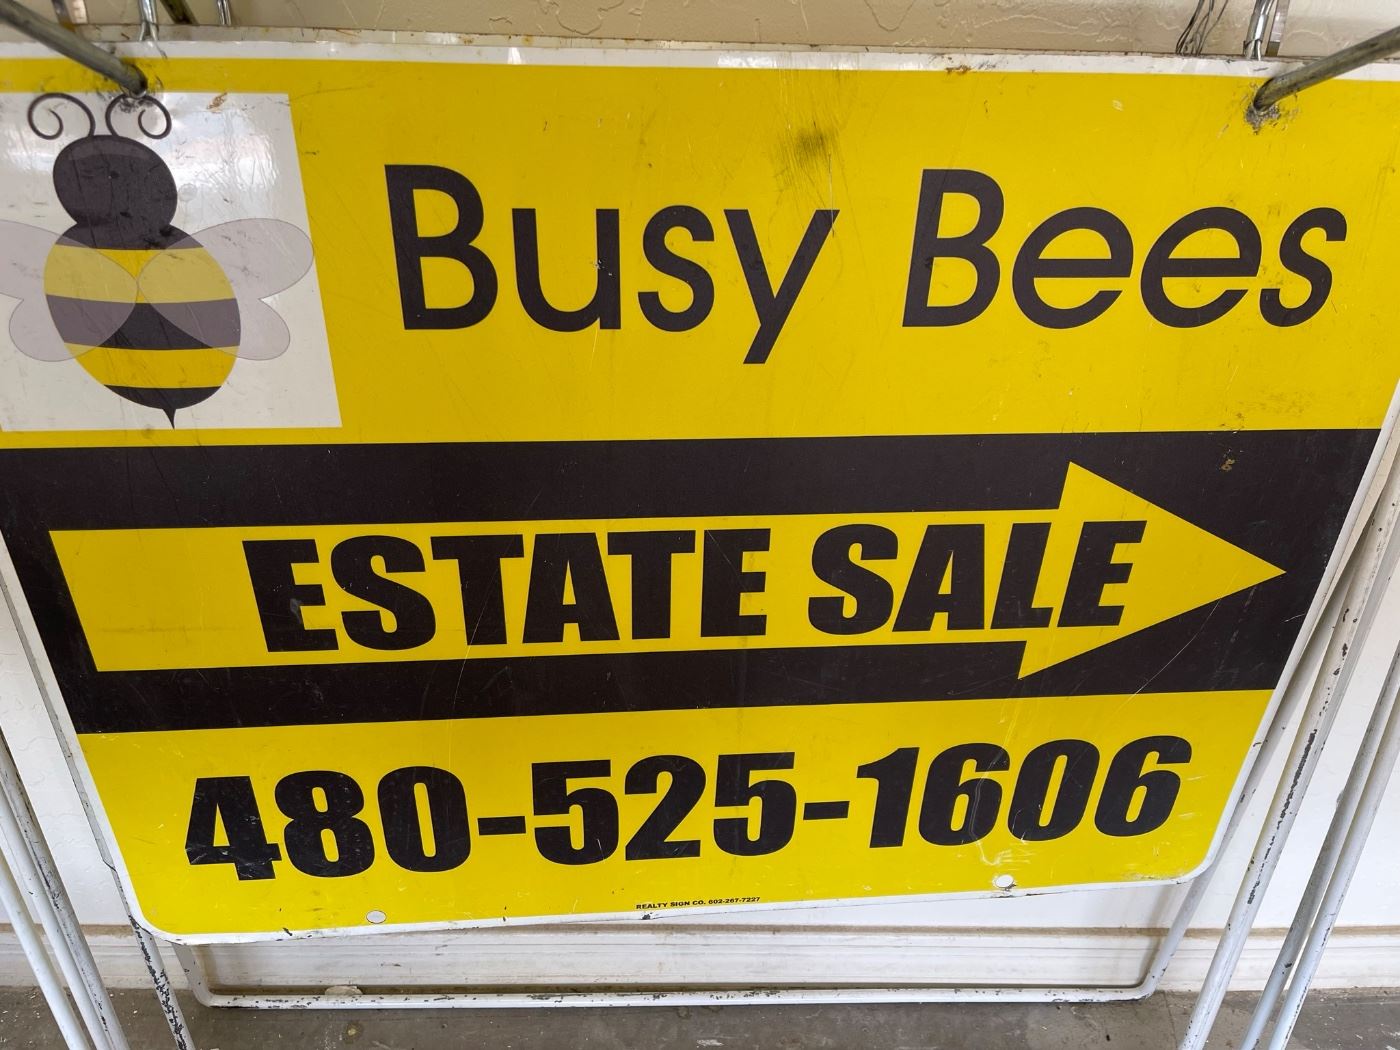 We are the Busy Bees!